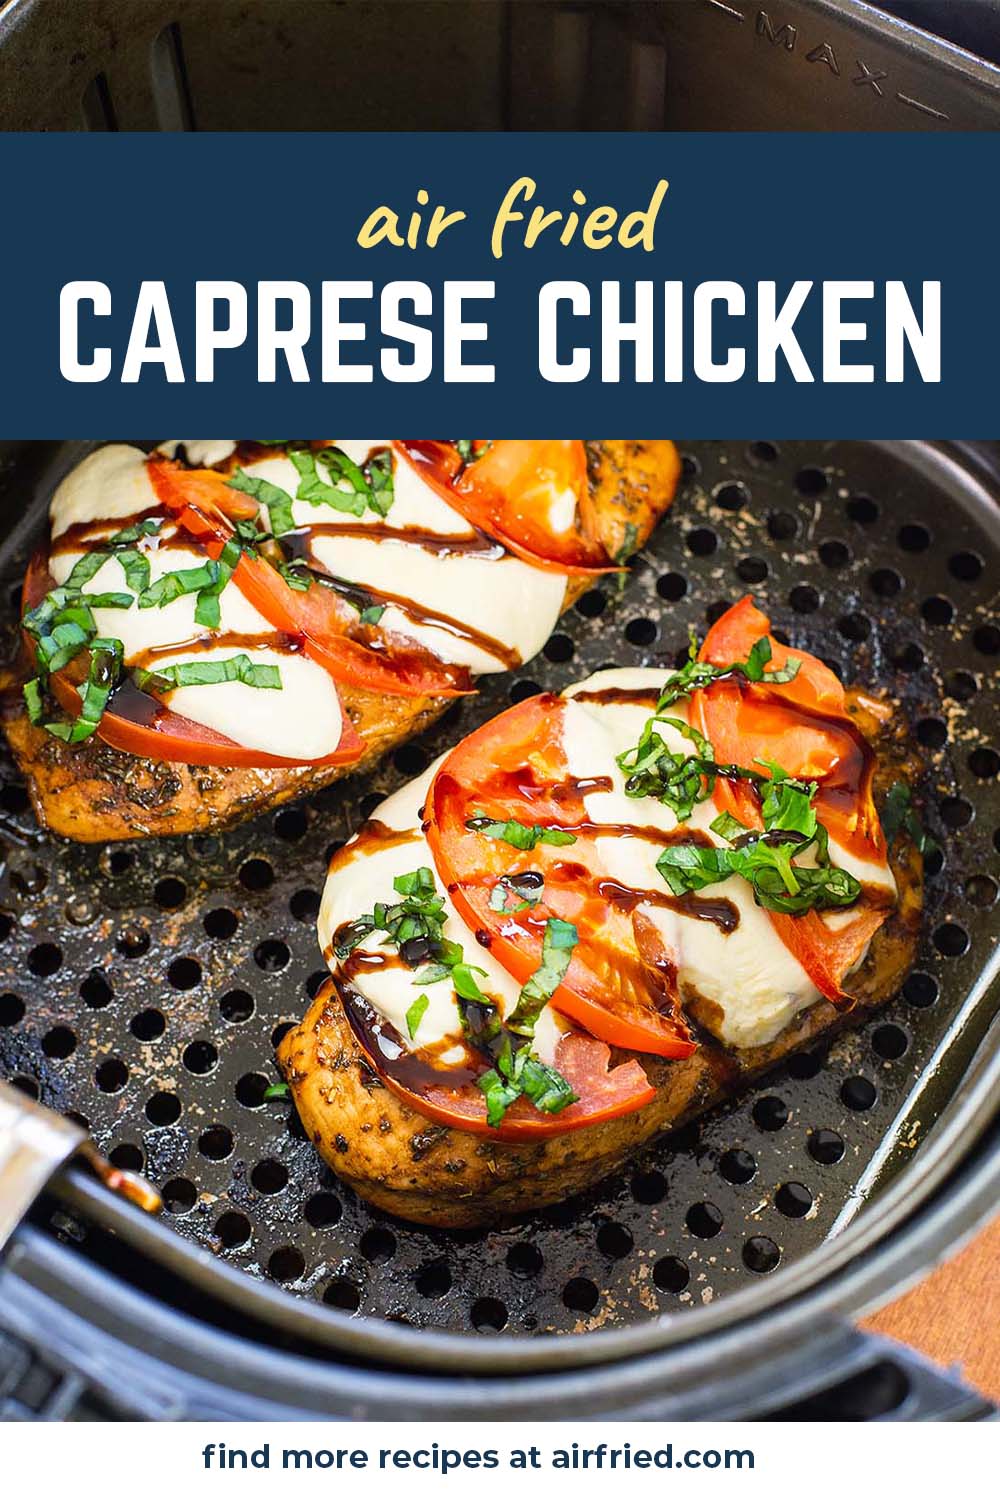 We made this wonderful chicken caprese in our air fryer! The chicken was nice and tender, and the toppings made the dish wonderful!